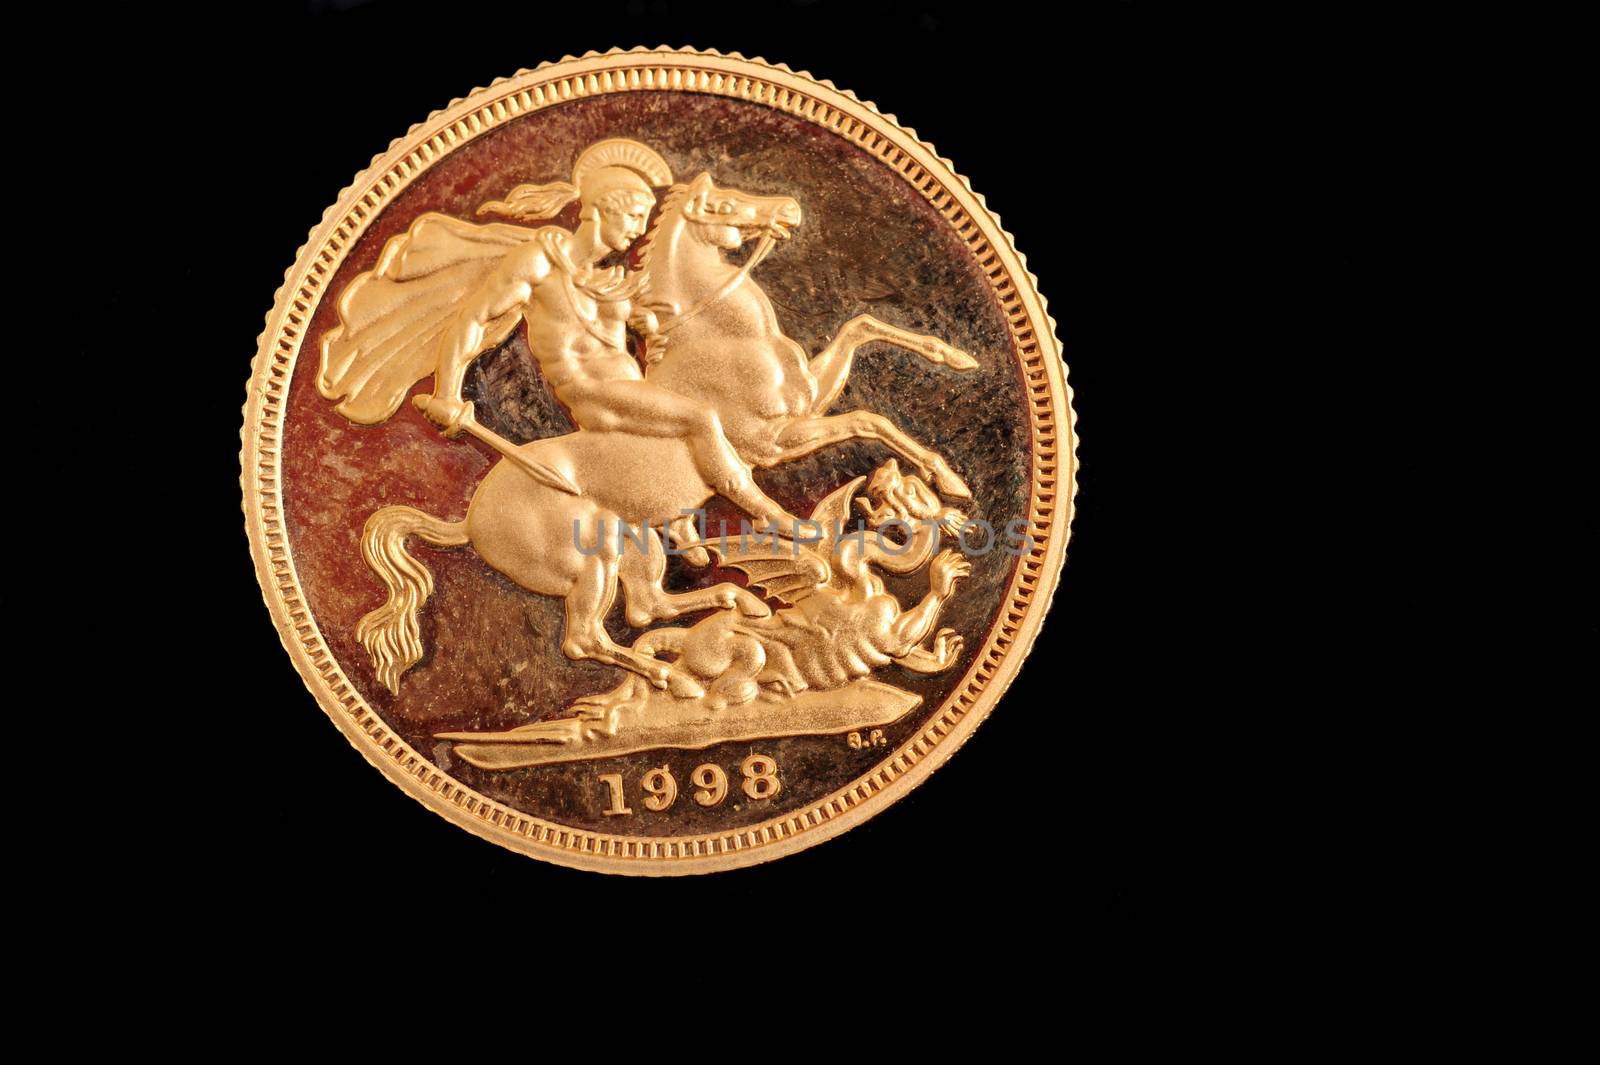 Gold Sovereign Coin by seawaters